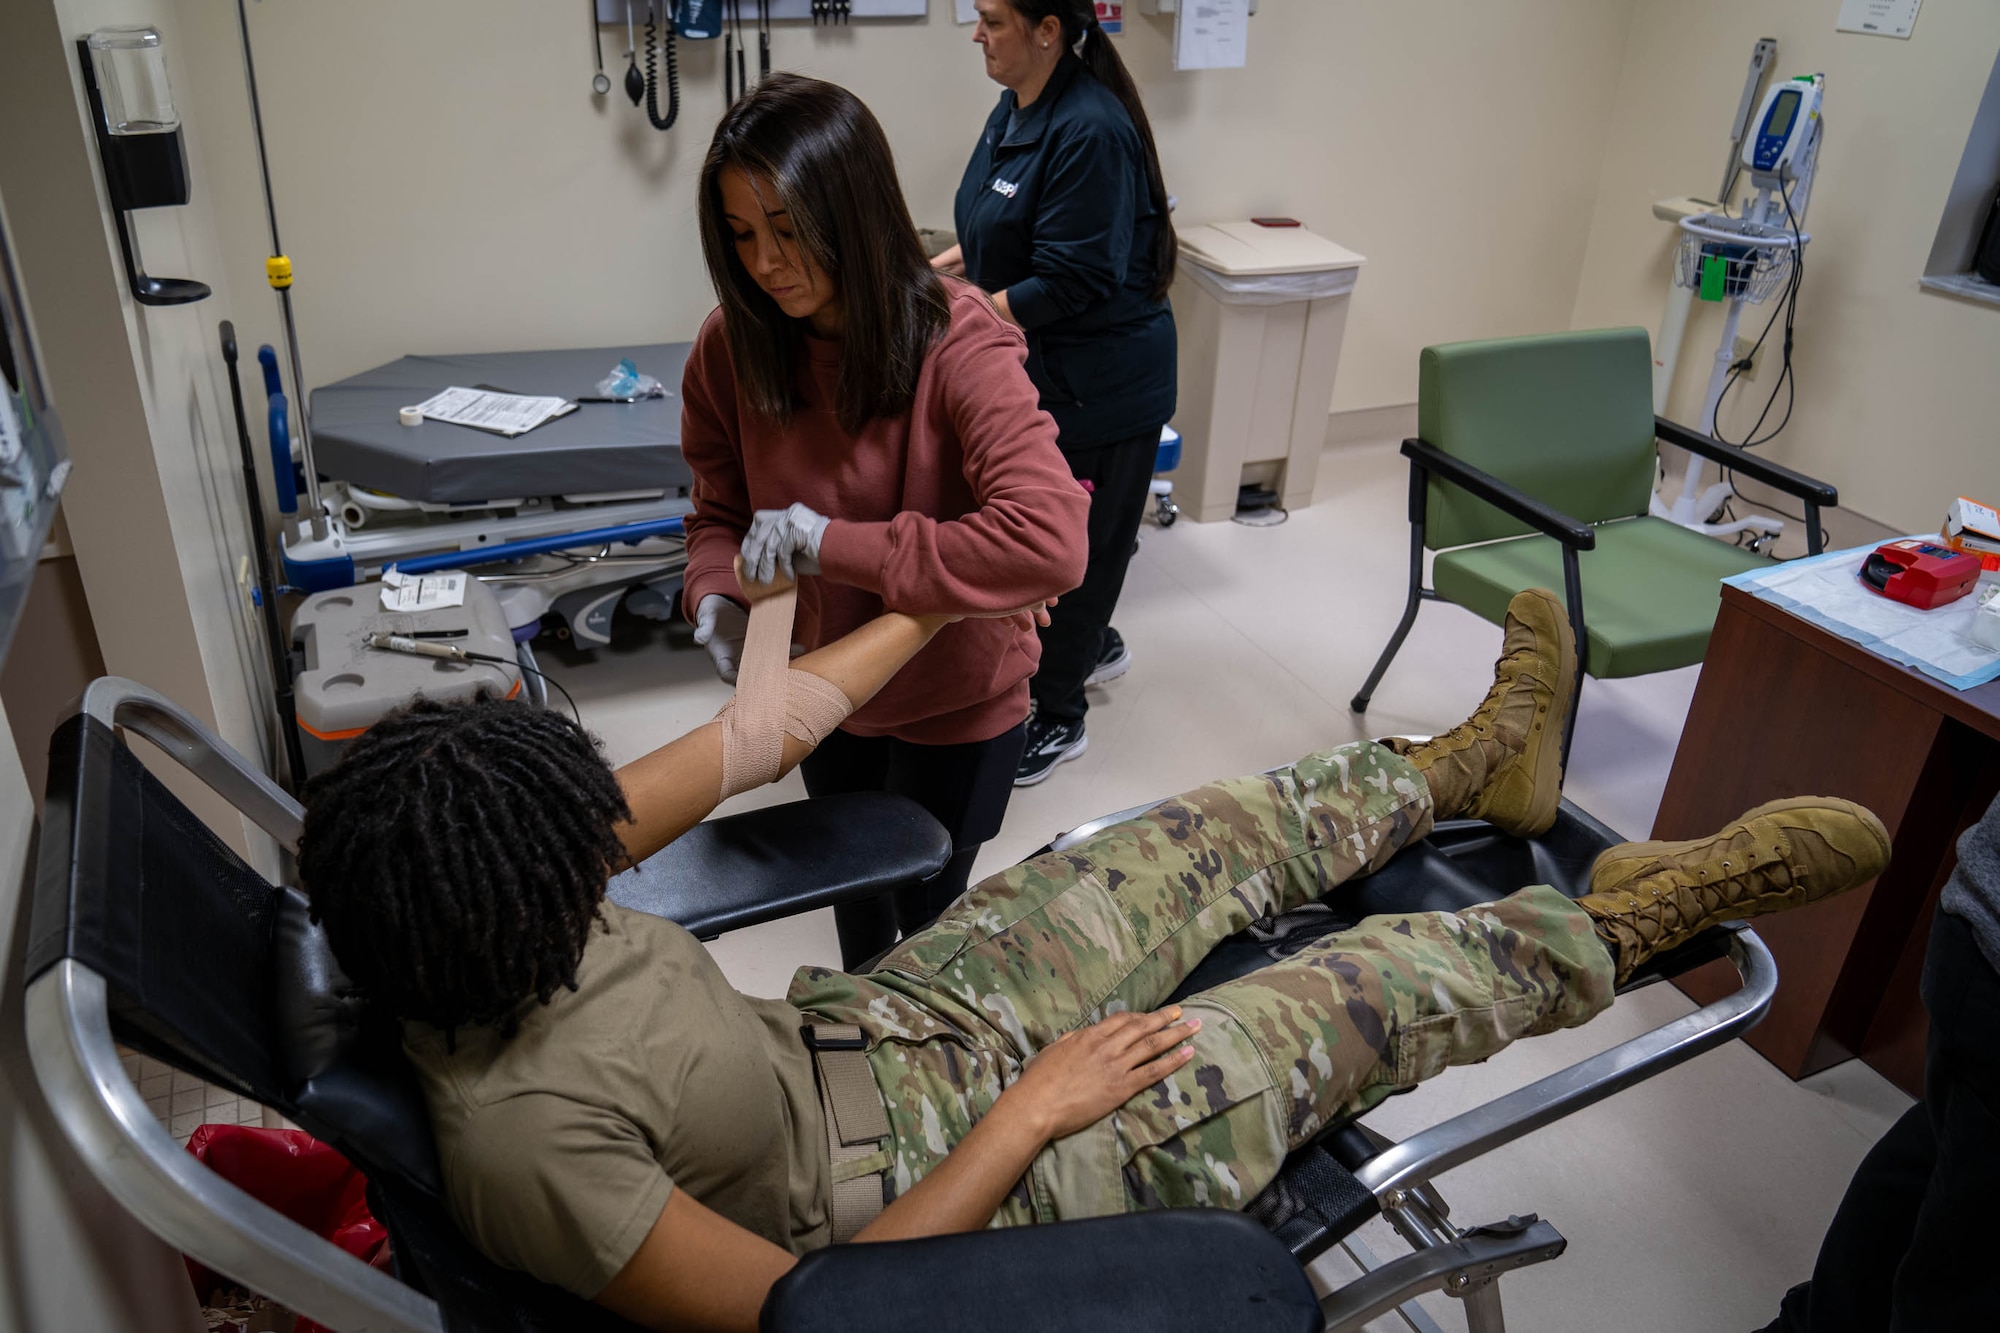 U.S. Air Force Airman 1st Class Devyn Waits, 81st Training Wing public affairs specialist, has her arm wrapped by Emilie Canlas, 81st Medical group lab technician, after donating blood at the Triangle Clinic on Keesler Air Force Base, Mississippi, Jan. 18, 2024.